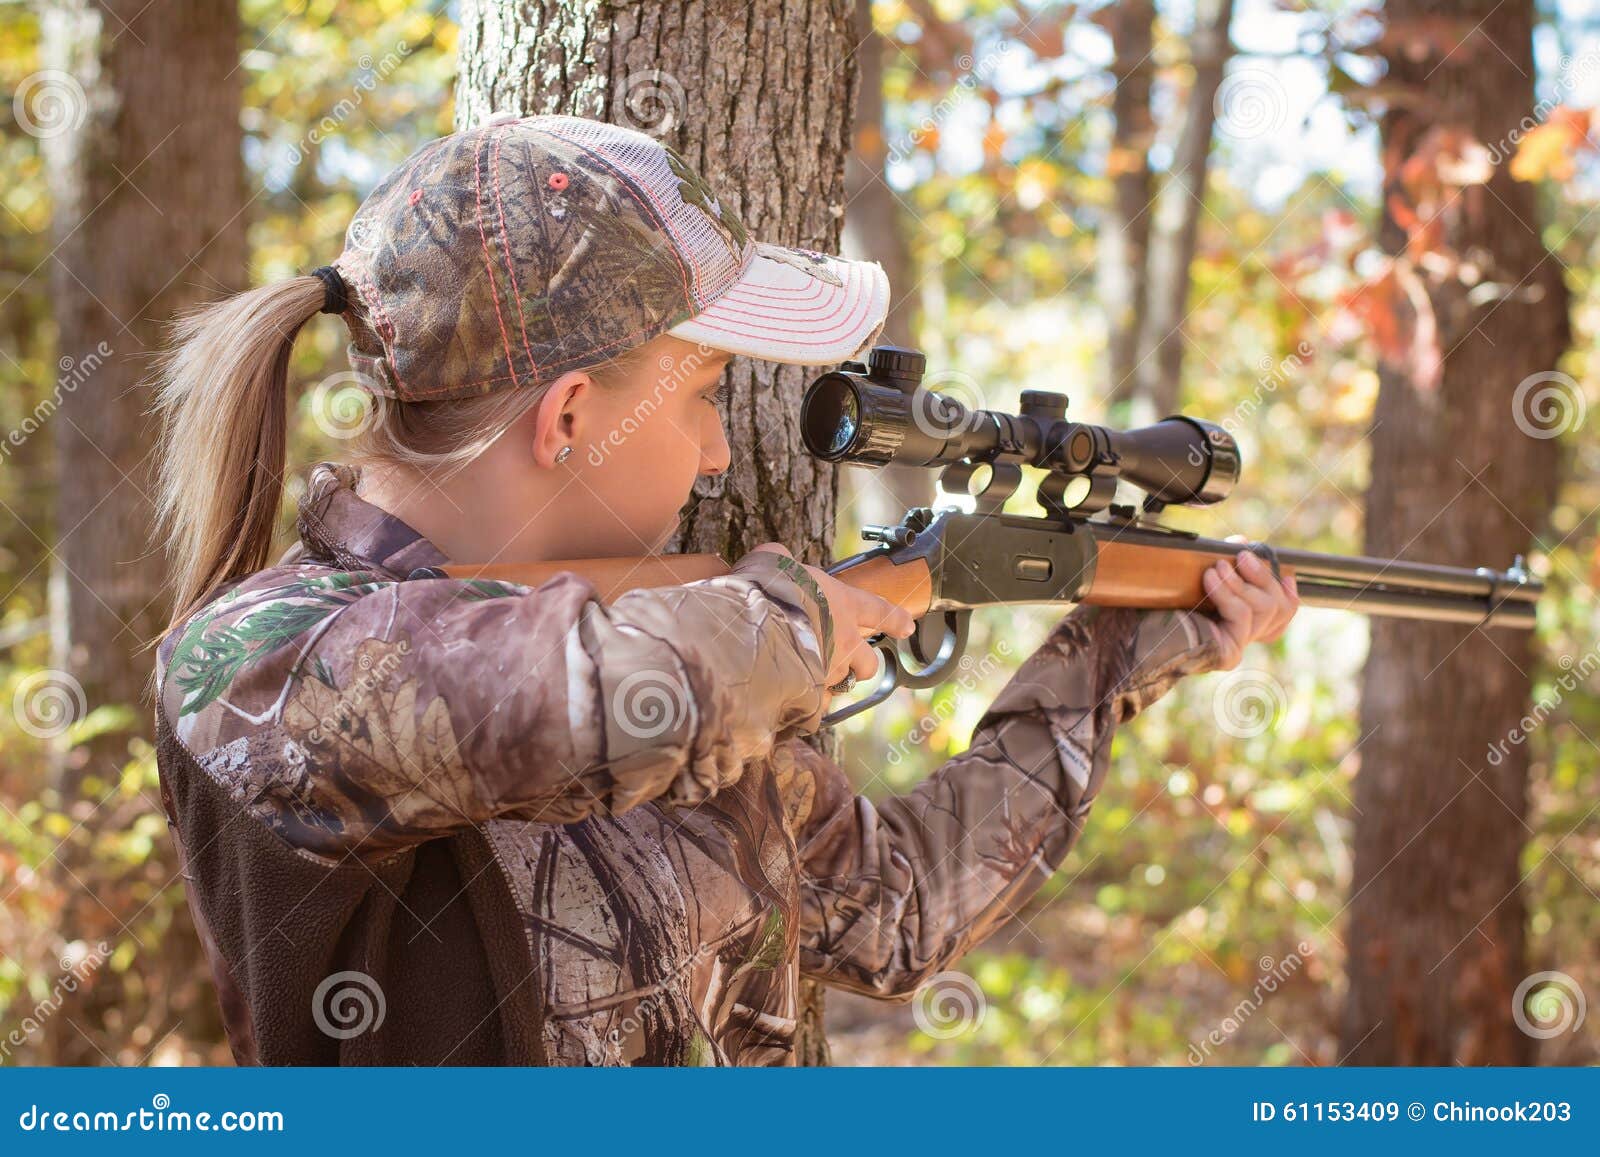 young-blonde-woman-hunting-aiming-rifle-wooded-area-wearing-camouflage-61153409.jpg